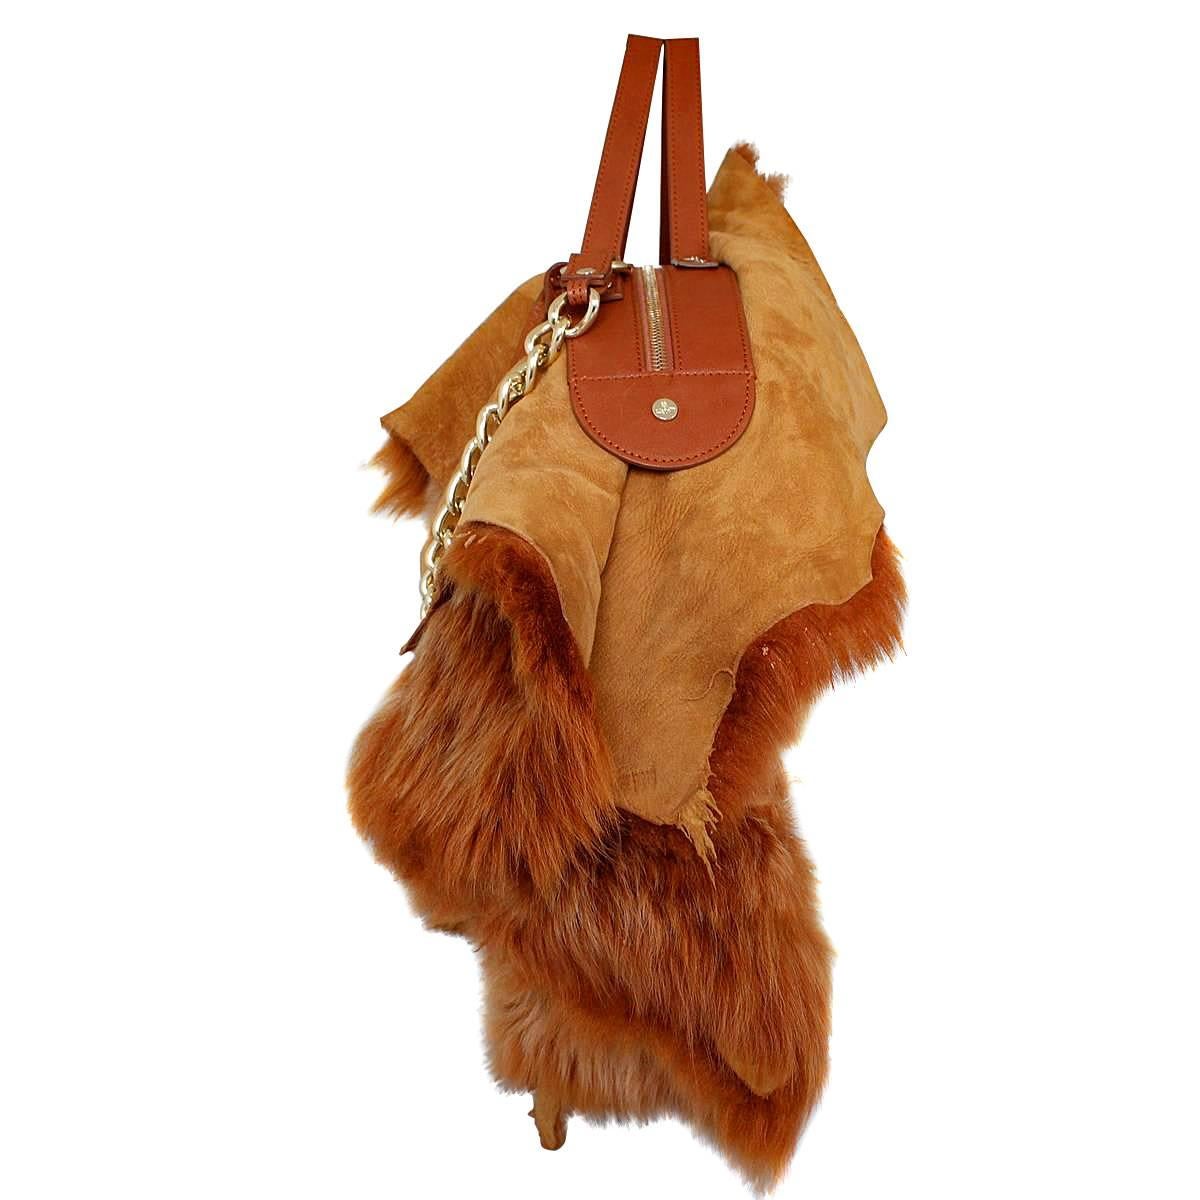 One of a kind !
Vivienne Westwood style !
Ecologic fur
Camel color
Golden chain
Two handles
Zip closure
Internal zip pocket
Cm 68 x 40 (26.7 x 15.7 inches)
With dustbag
Worldwide express shipping included in the price !